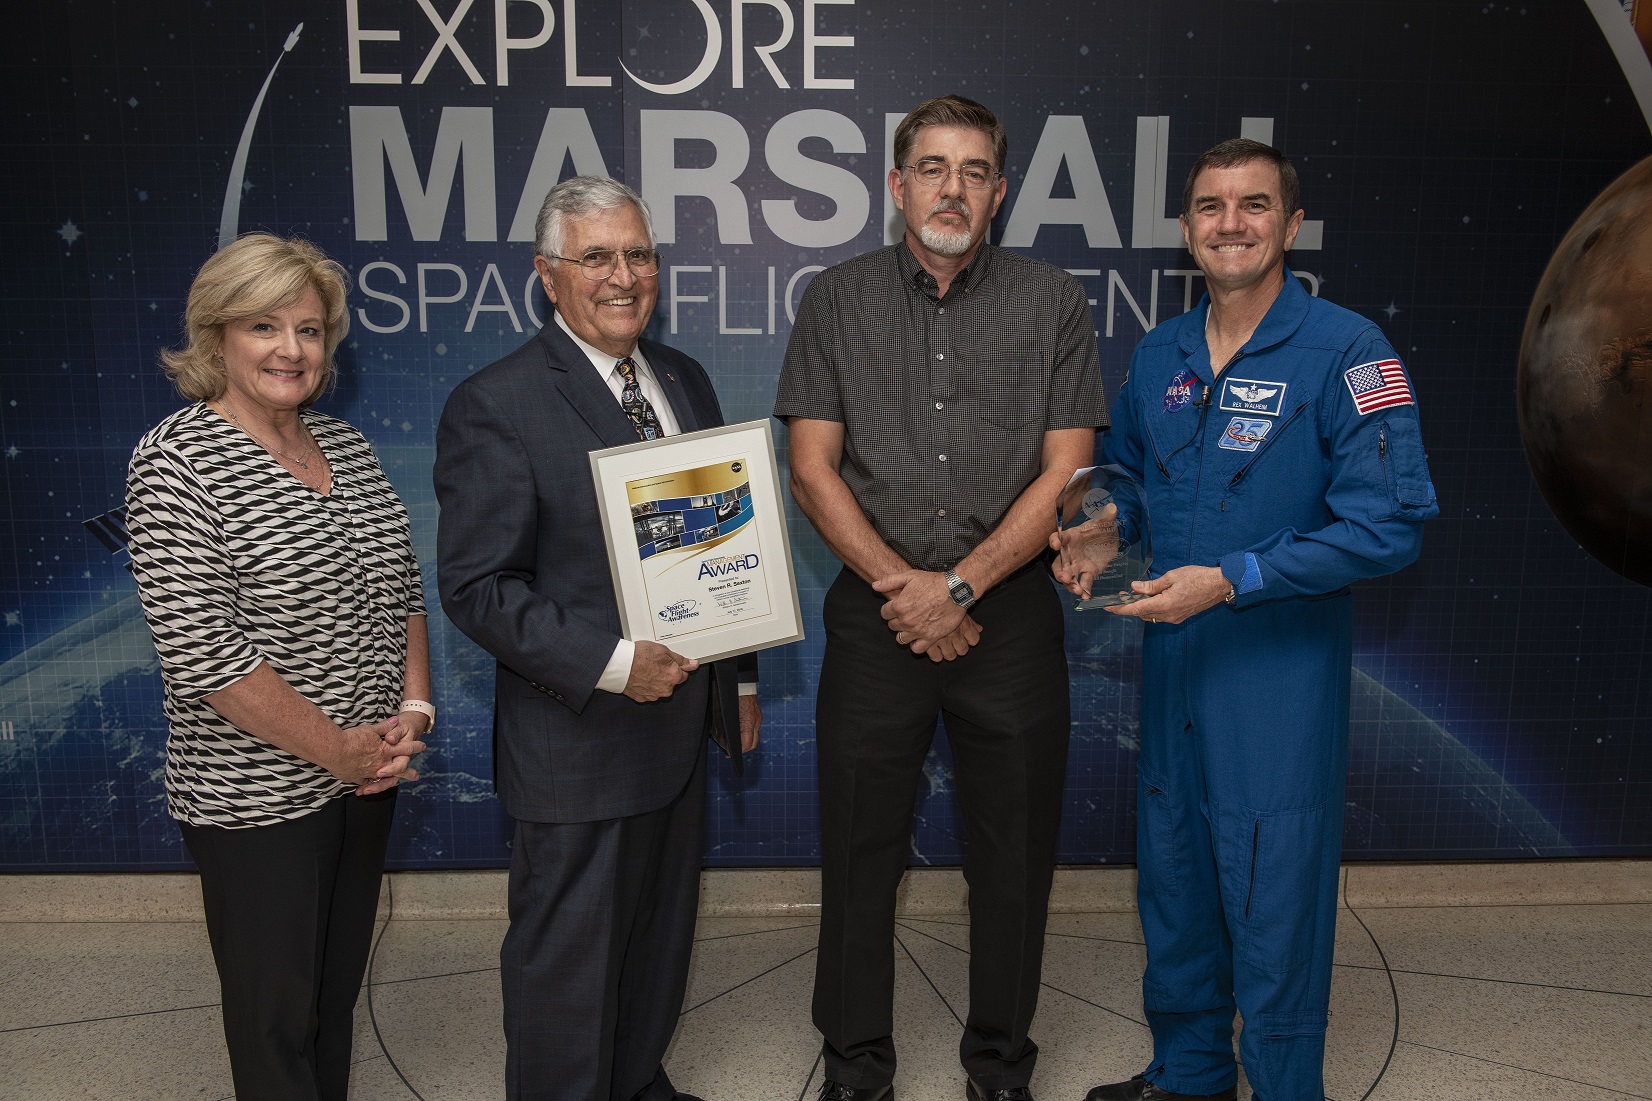 Steven Sexton, third from left, accepts the Management Award at the Space Flight Awareness Awards ceremony July 17.